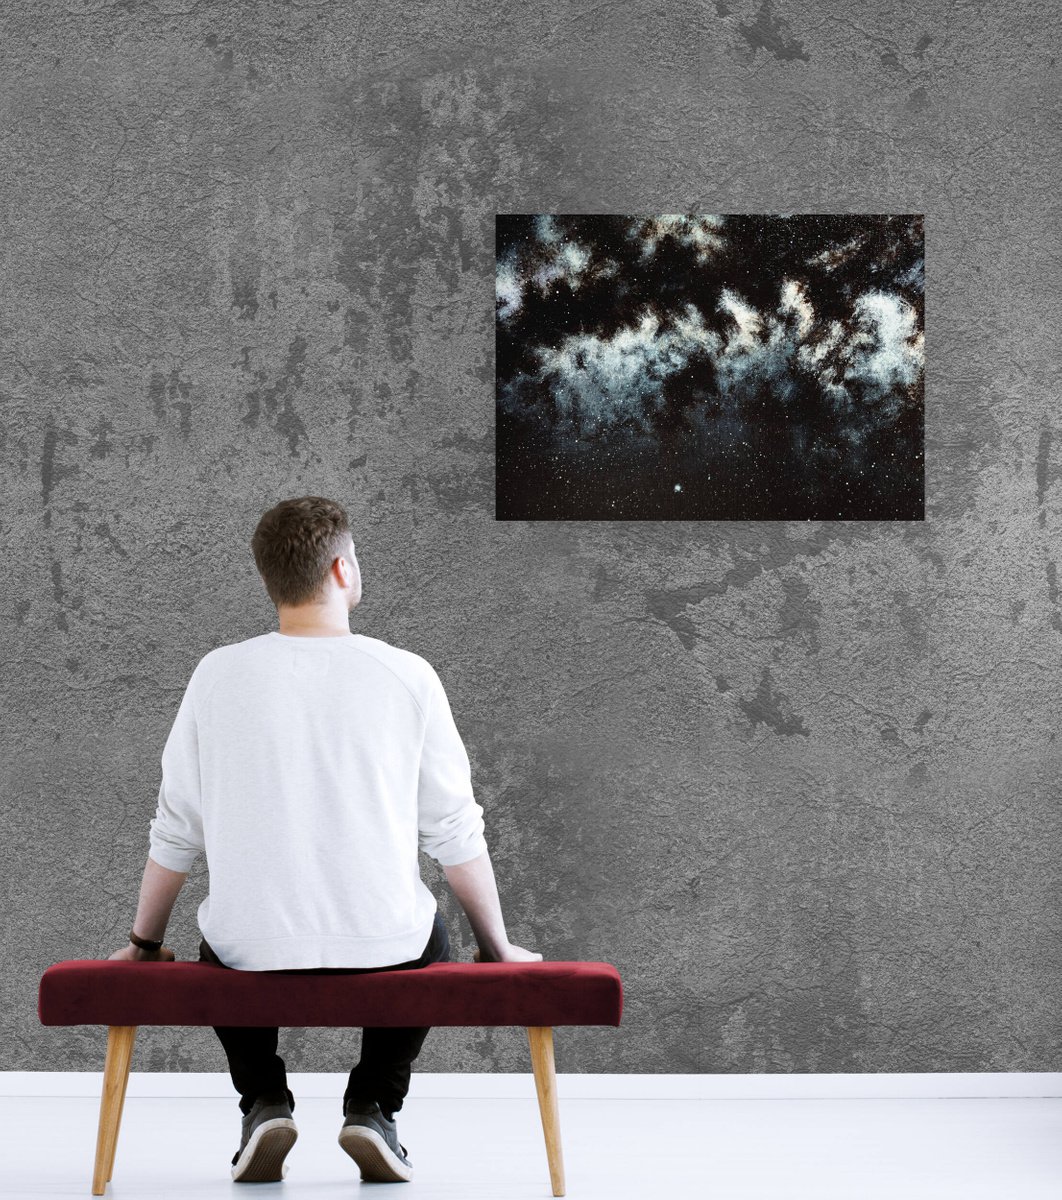 LIBERTY - XL sky, soft clouds, Milky way, astronomy, Giclee print on canvas by Rimma Savina